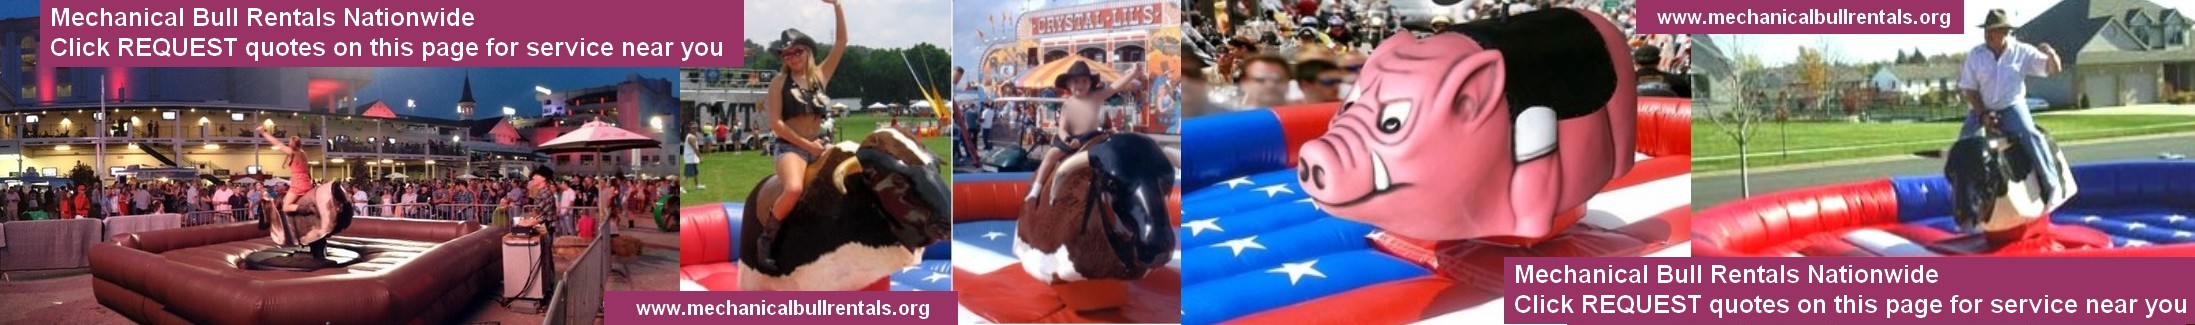 Mechanical Bull Rentals Beaumont Texas TX and near you. Free referrals to local mechanical bull companies LOGO